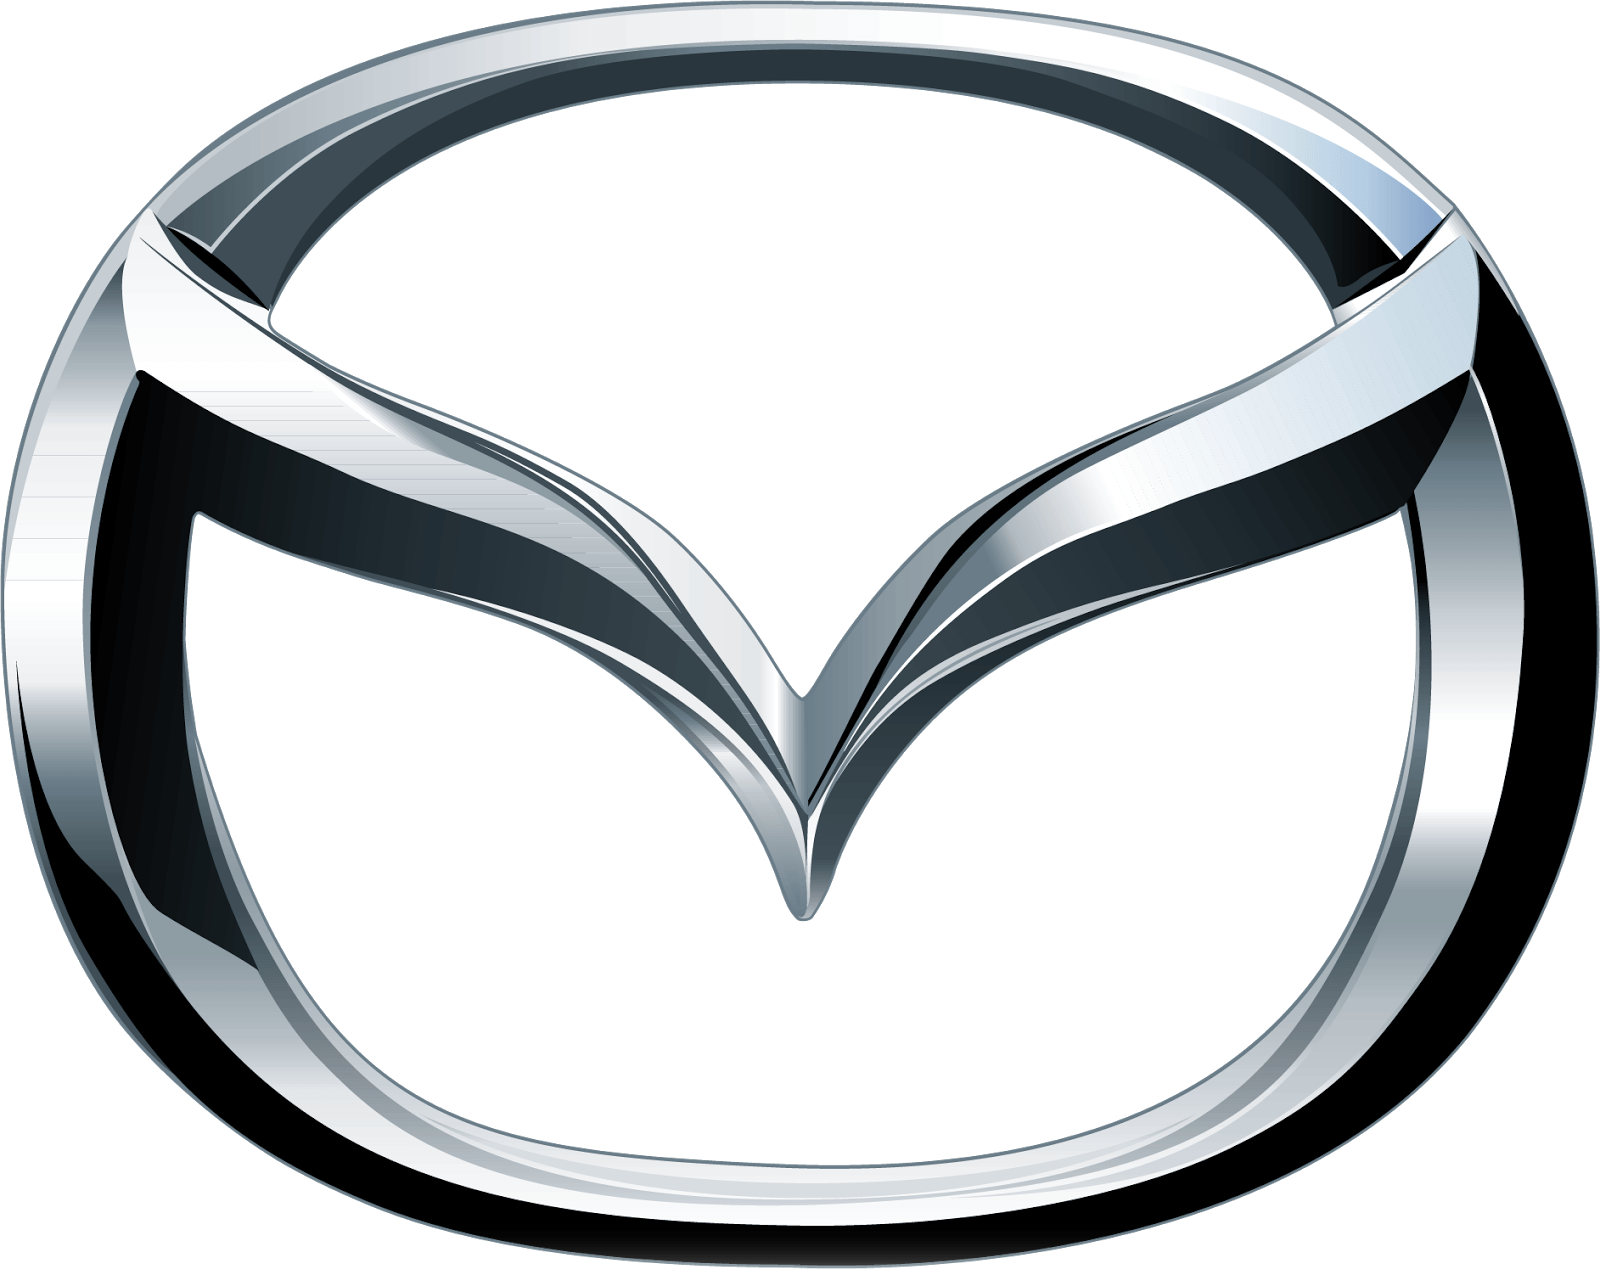 Looks Like in a Red Circle Logo - Mazda Logo, Mazda Car Symbol Meaning and History | Car Brand Names.com